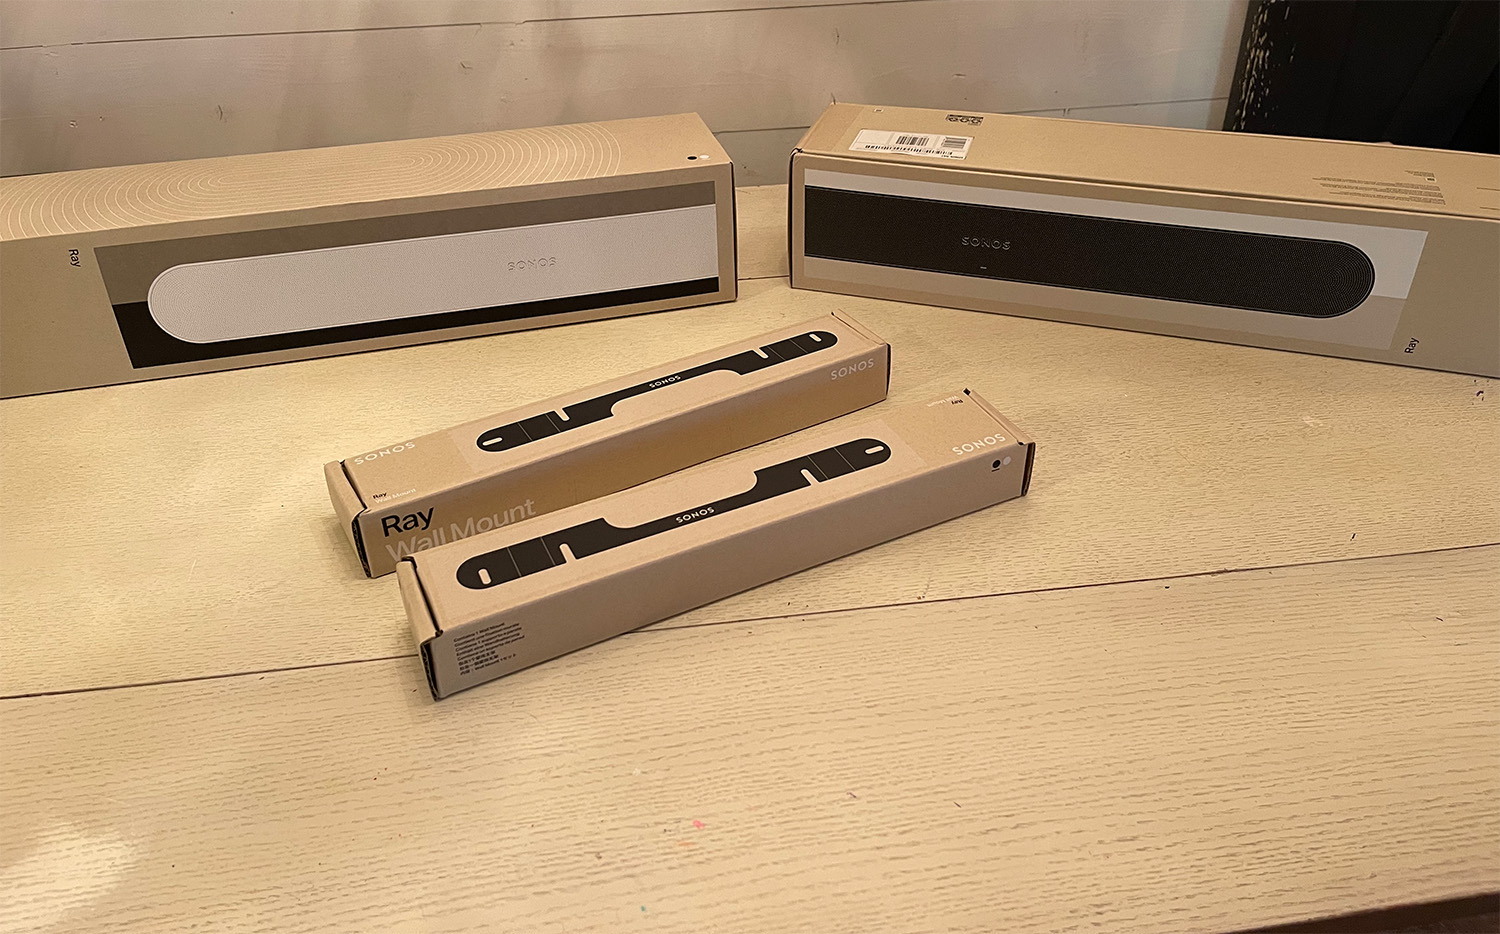 Enter for chance to win an amazing Sonos Ray sound bar